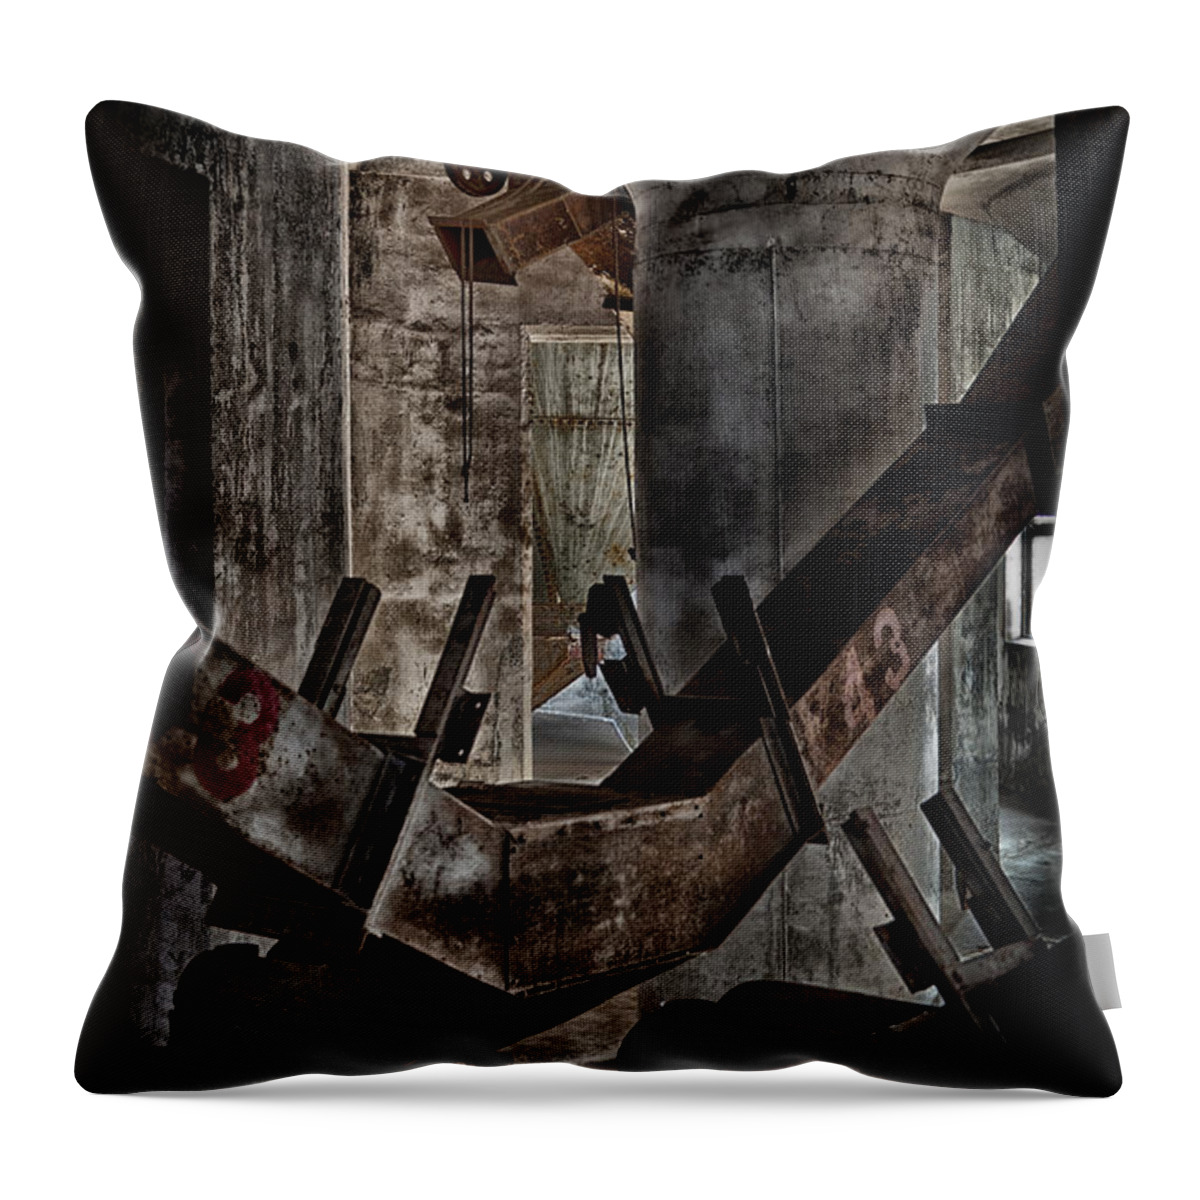 Buffalo Throw Pillow featuring the photograph Abstract by Phil Pantano